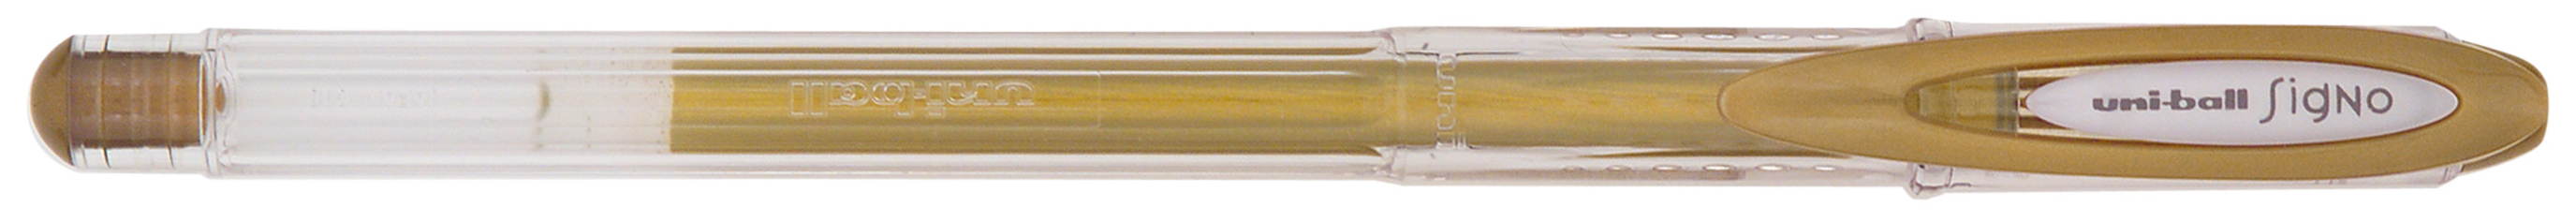 UNI-BALL Signo Noble Metal 0.8mm UM120NM GOLD or or